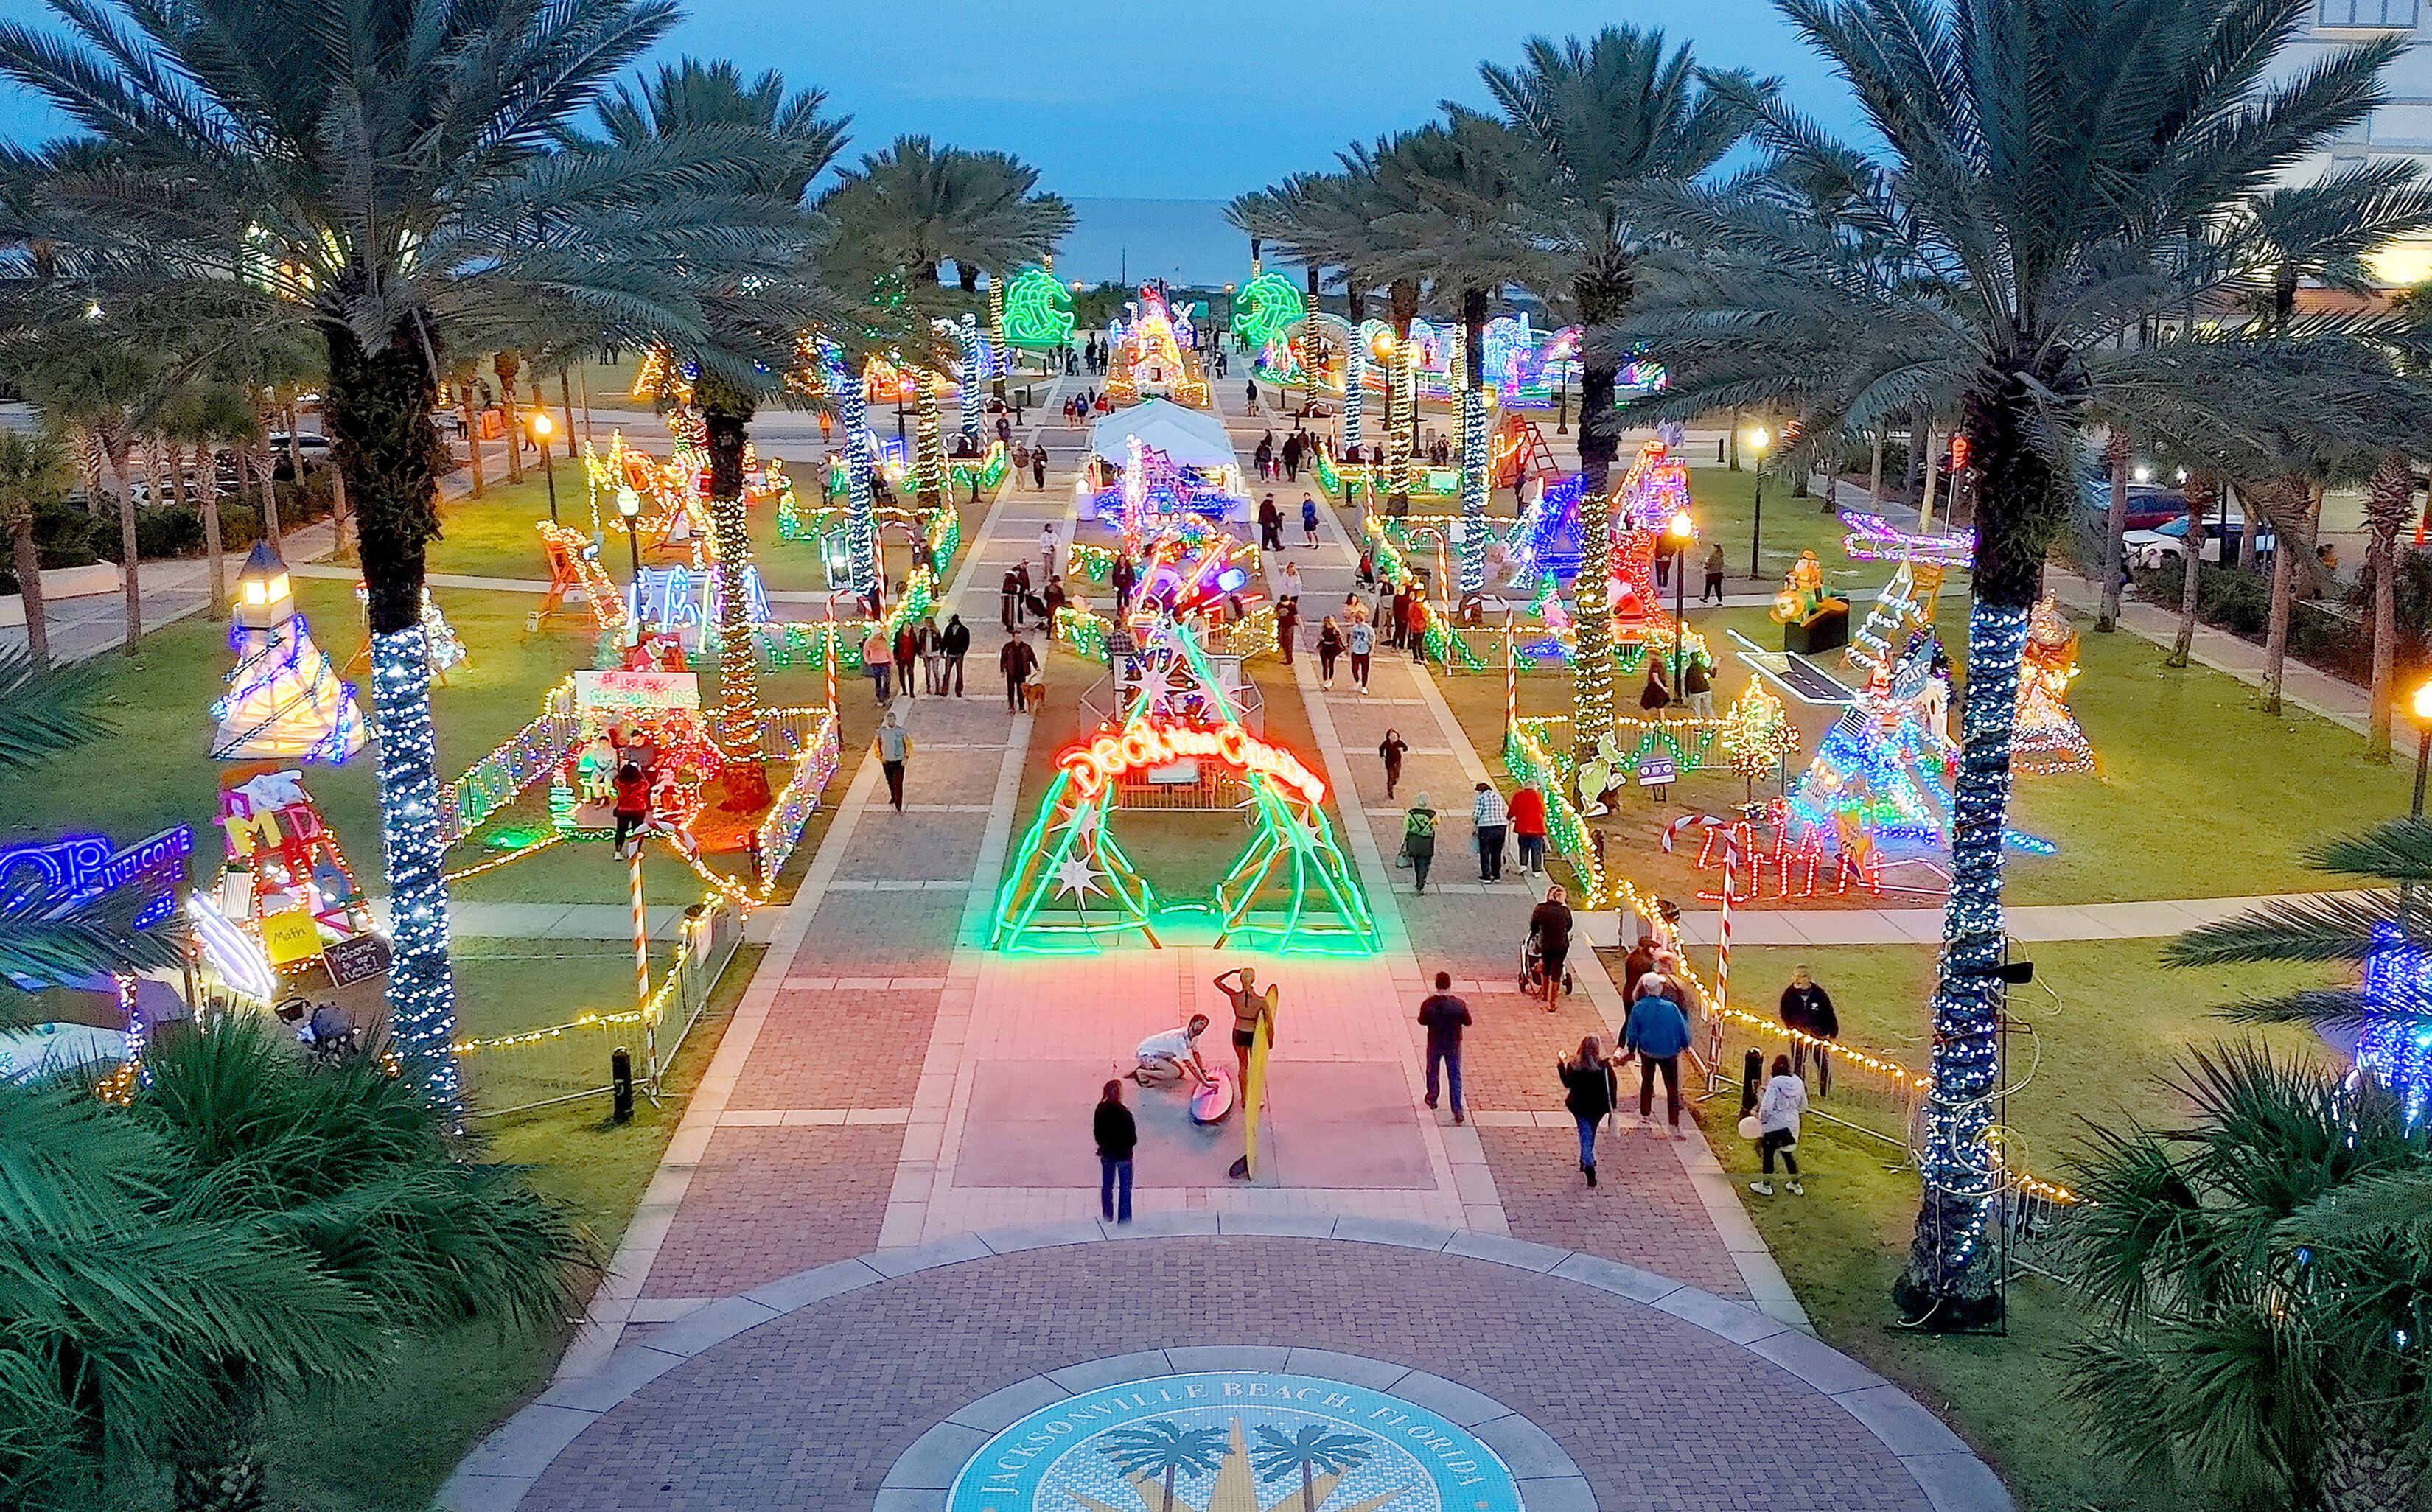 Deck the Chairs wraps up 2021 with largest-ever holiday display